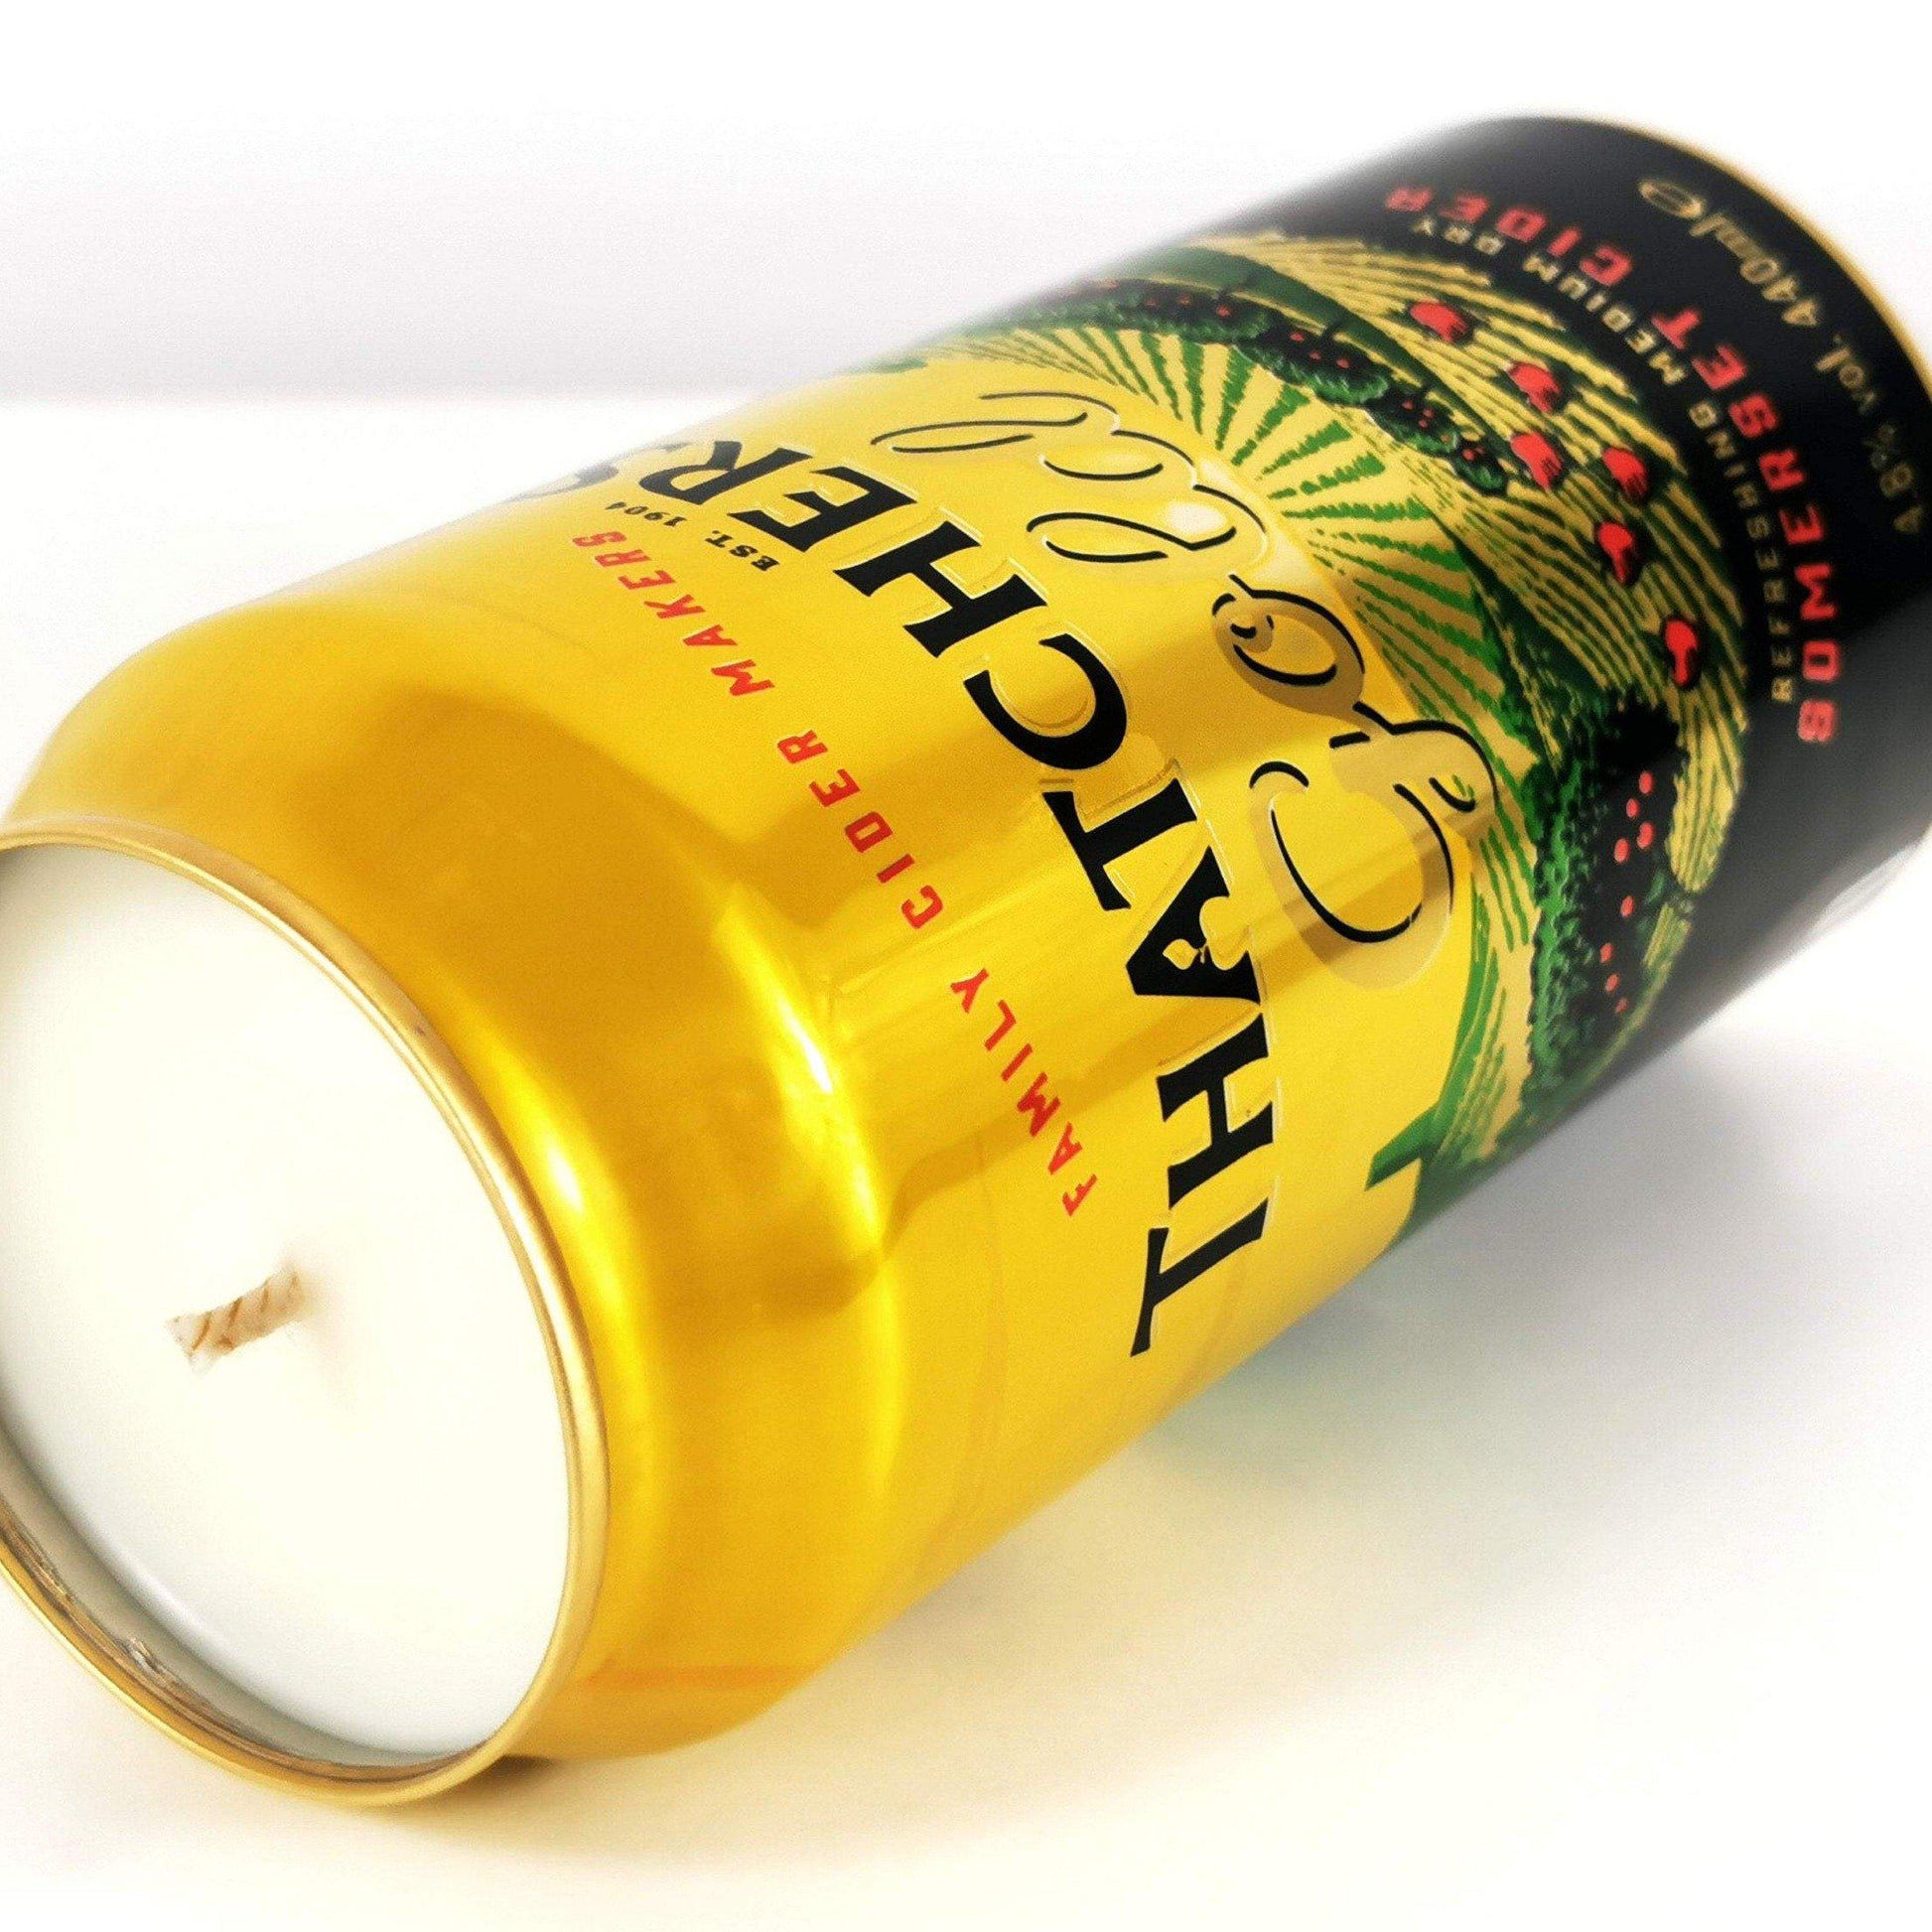 Thatchers Gold Cider Can Candle Cider Can Candles Adhock Homeware